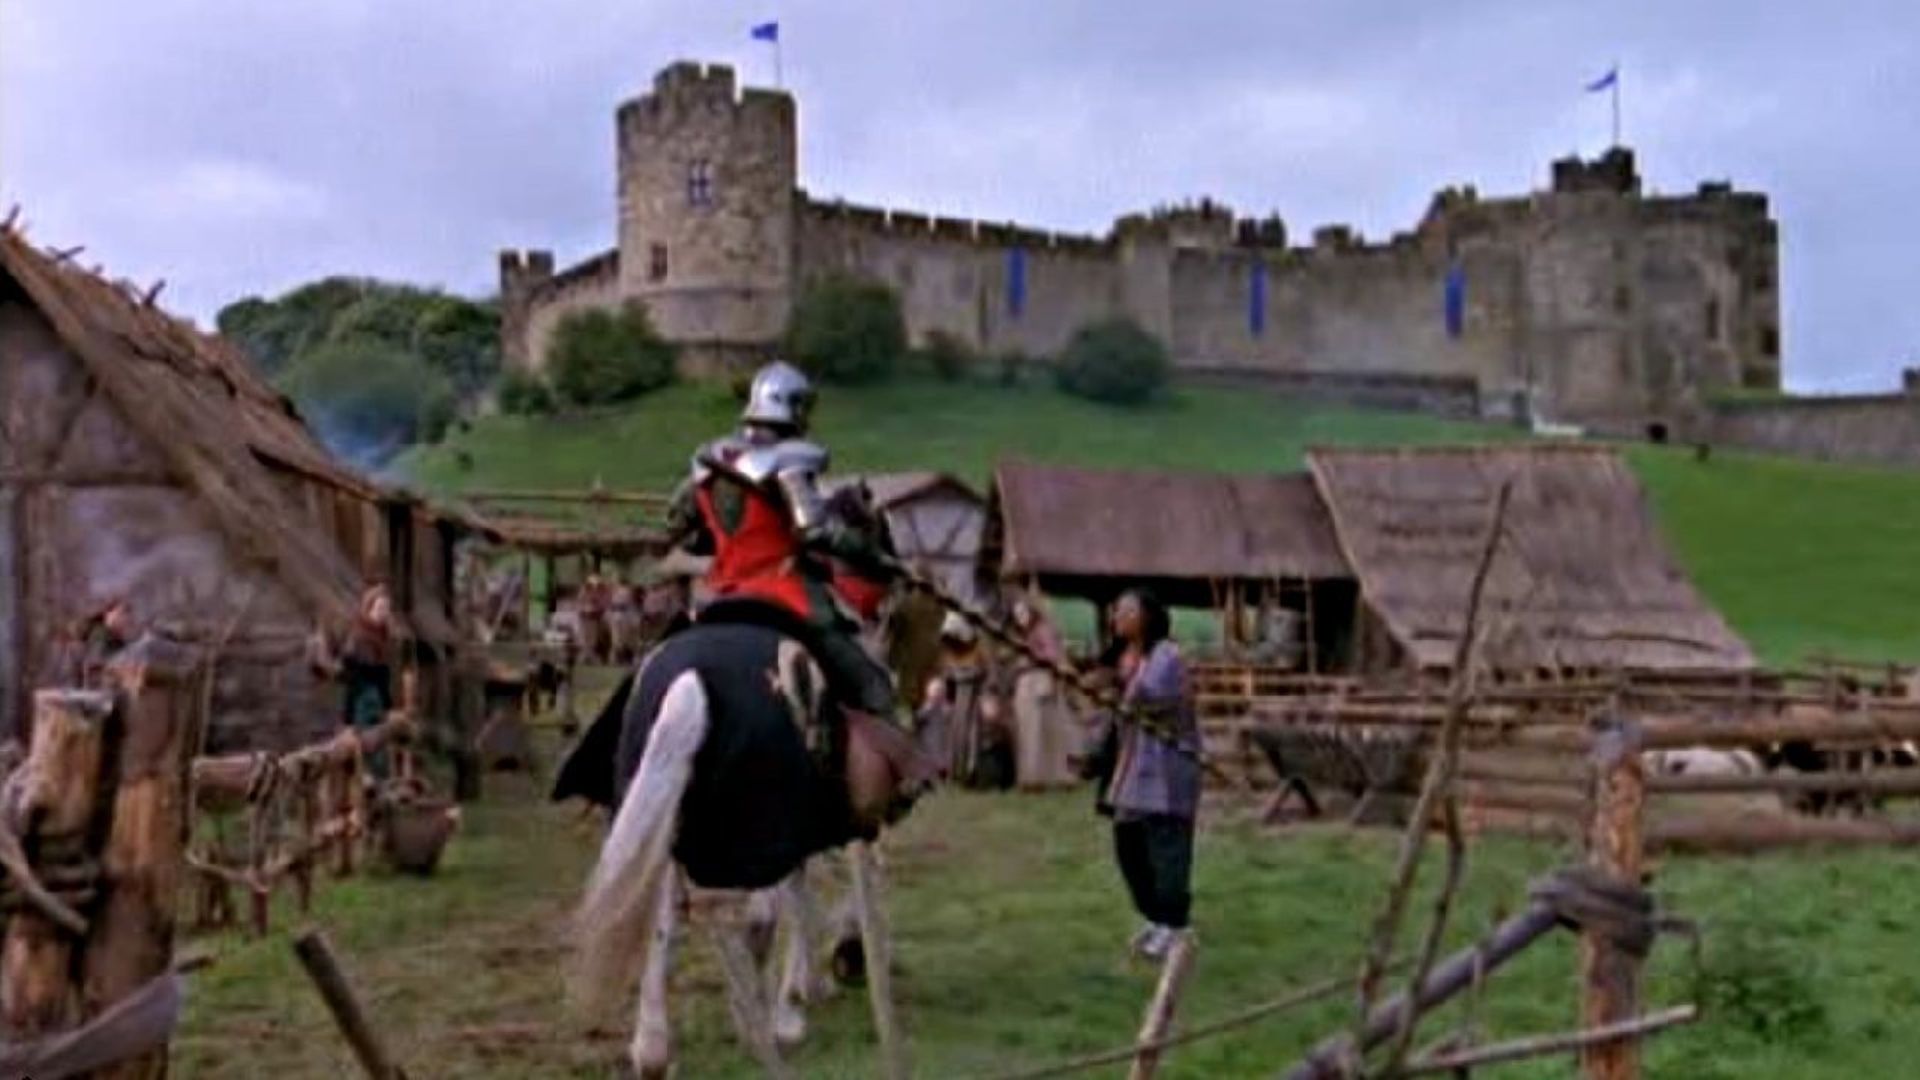 A Knight in Camelot Backdrop